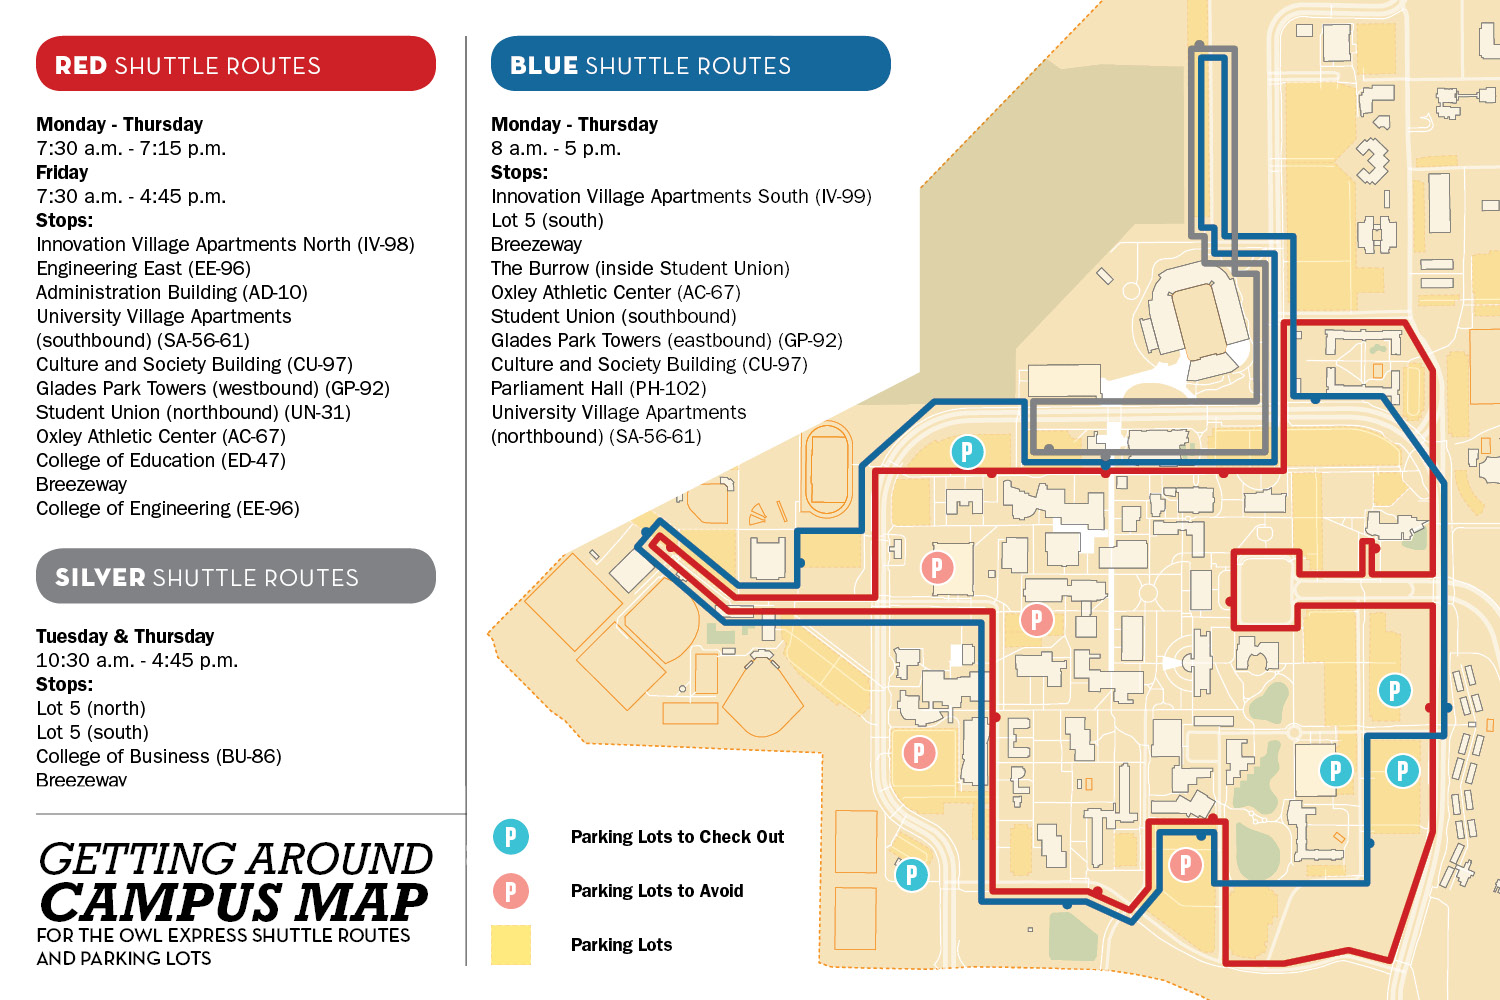 A guide to getting around FAU’s campuses